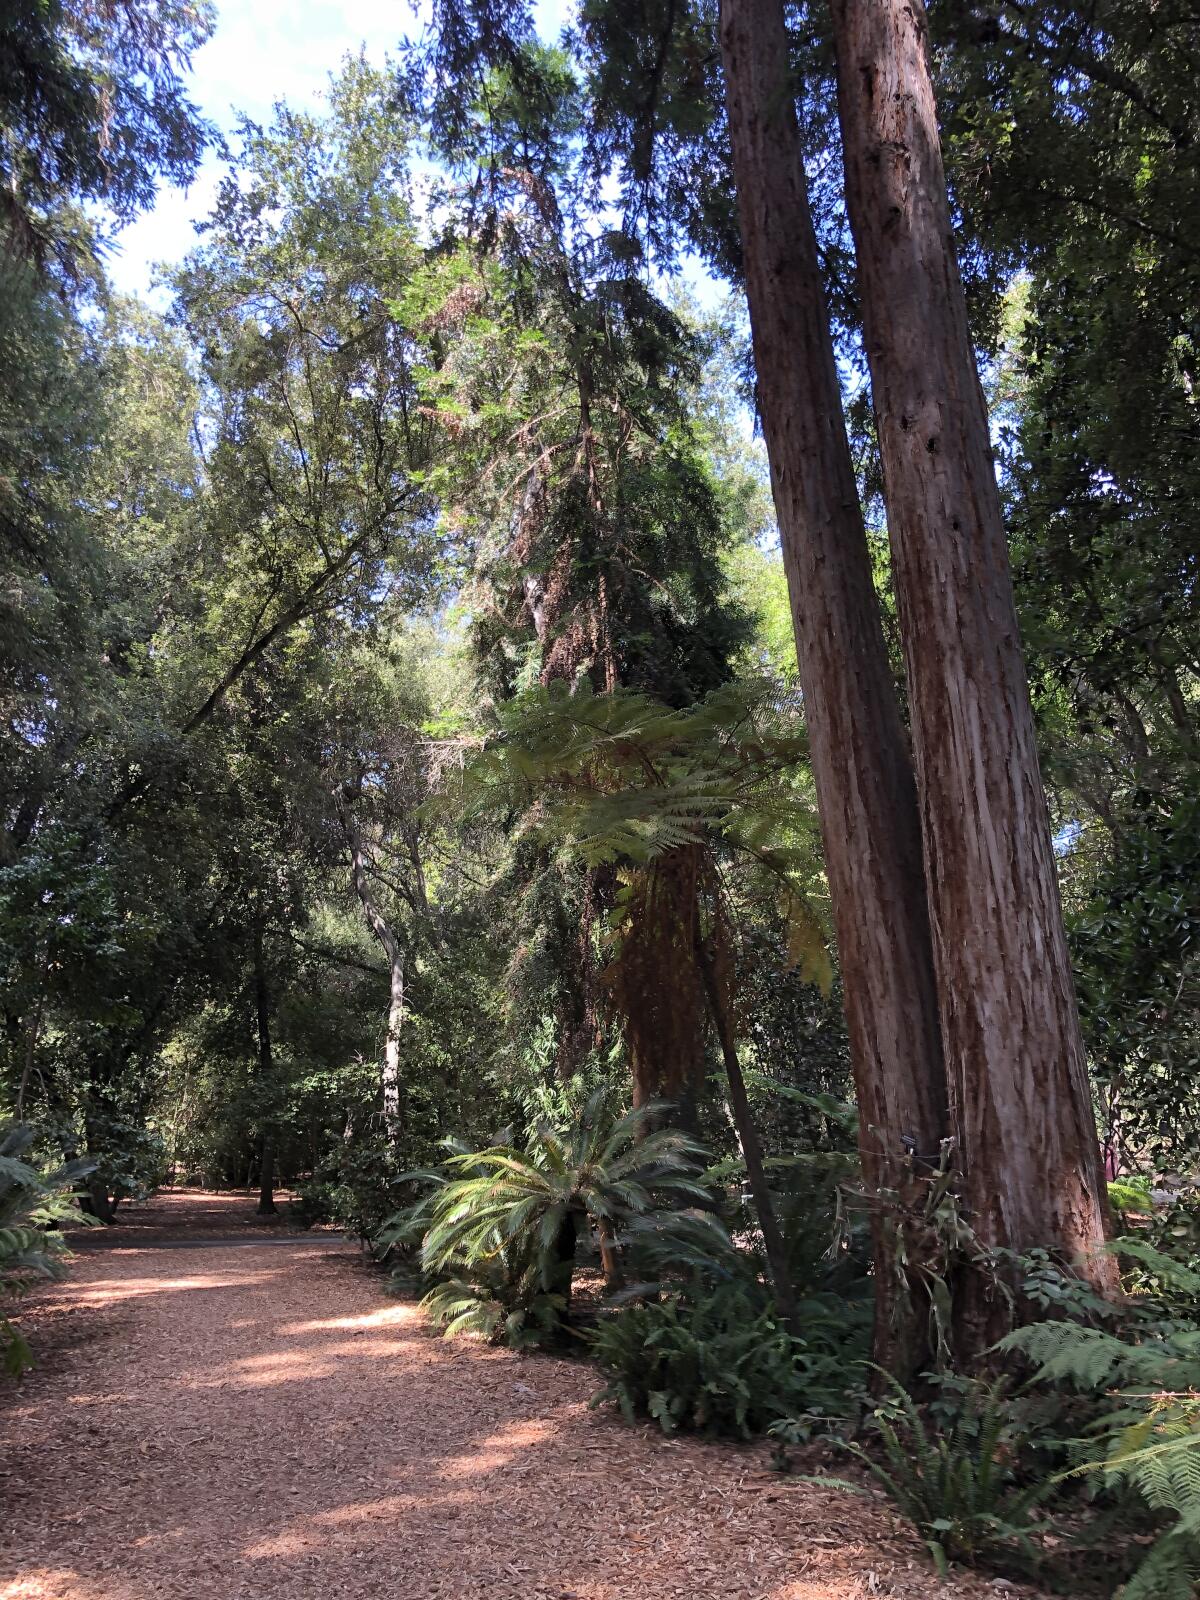 The ancient forest at Descanso Gardens 